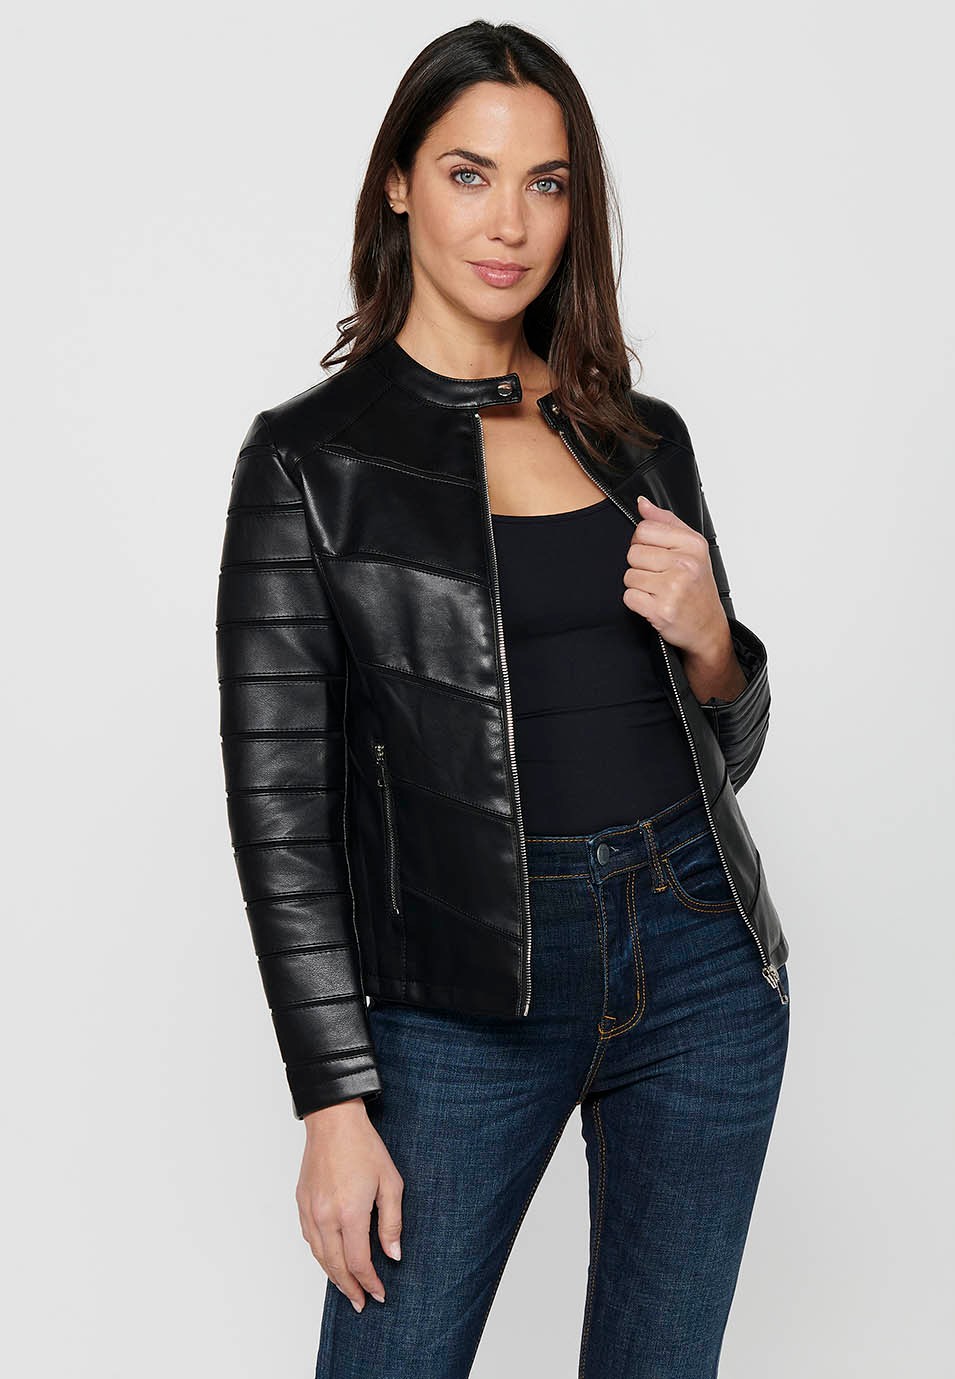 Long-sleeved leather-effect jacket with round neck and cut details. Black Zipper Front Closure for Women